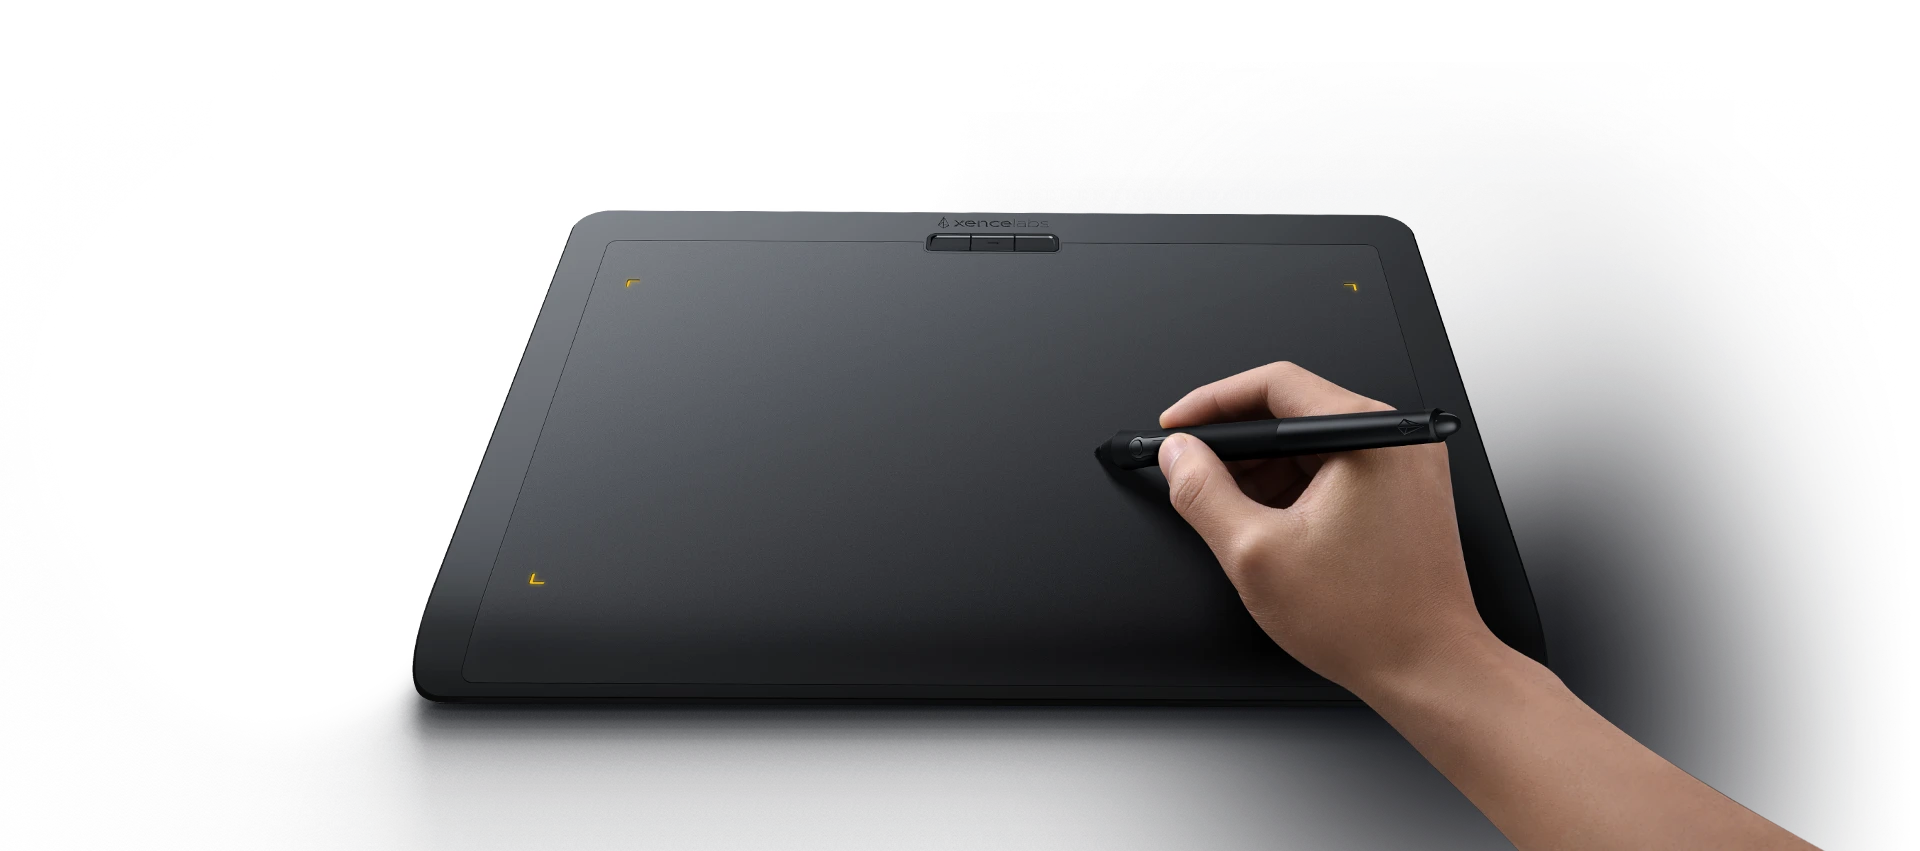 Xencelabs sketch tool family grows with Pen Tablet Small - DEVELOP3D